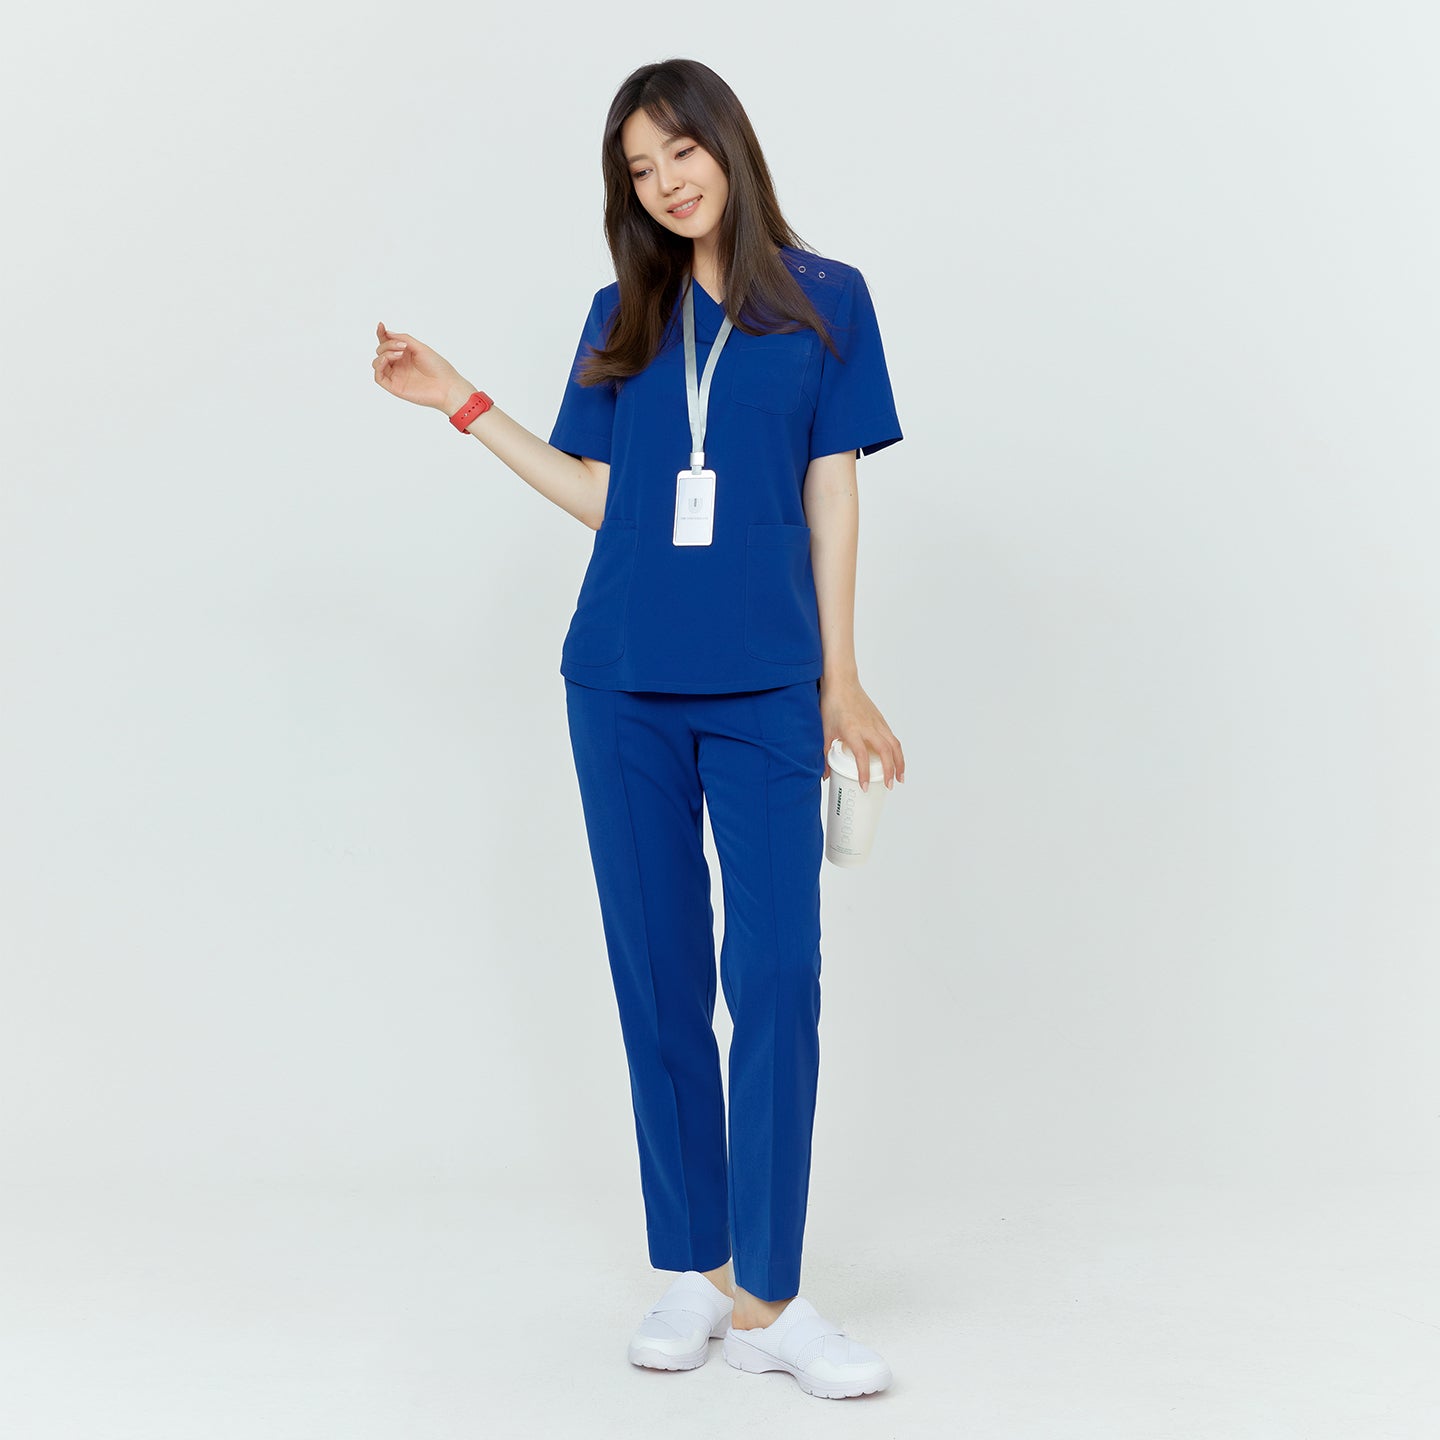 Woman in medical scrubs with a lanyard, standing and holding a drink, smiling with her eyes closed,Royal Blue